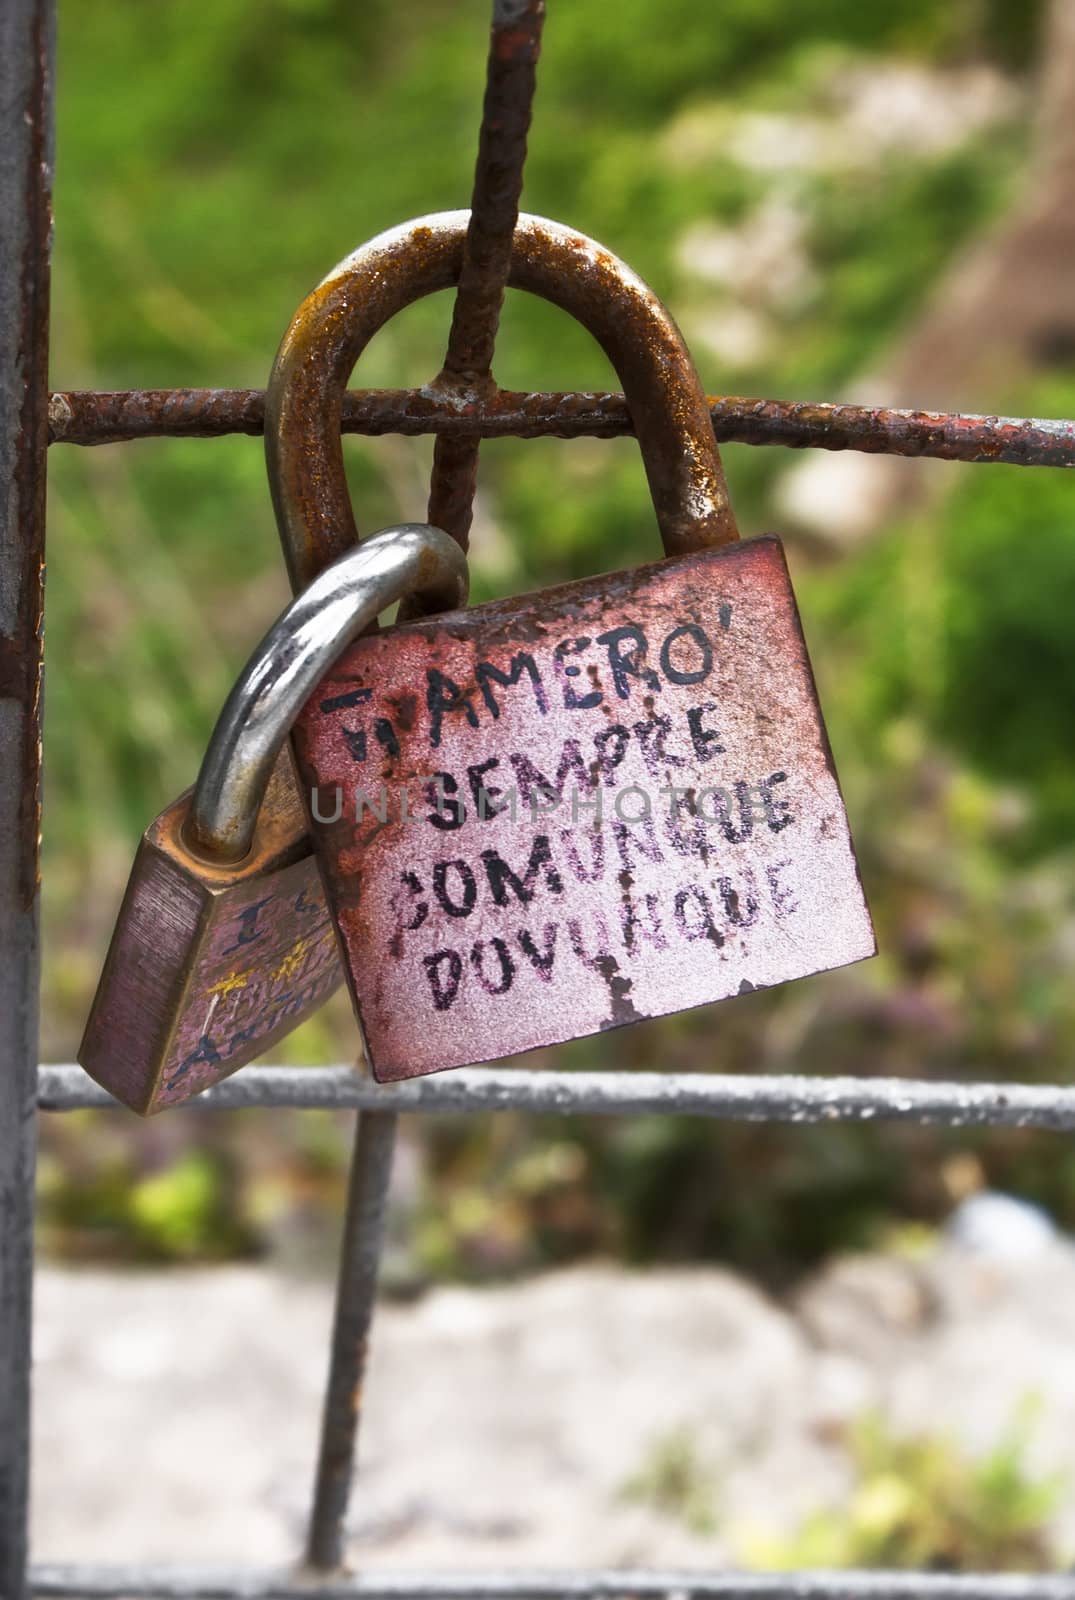 Love locks in Monreale. Sicily. Lovers lock their love with the lock.